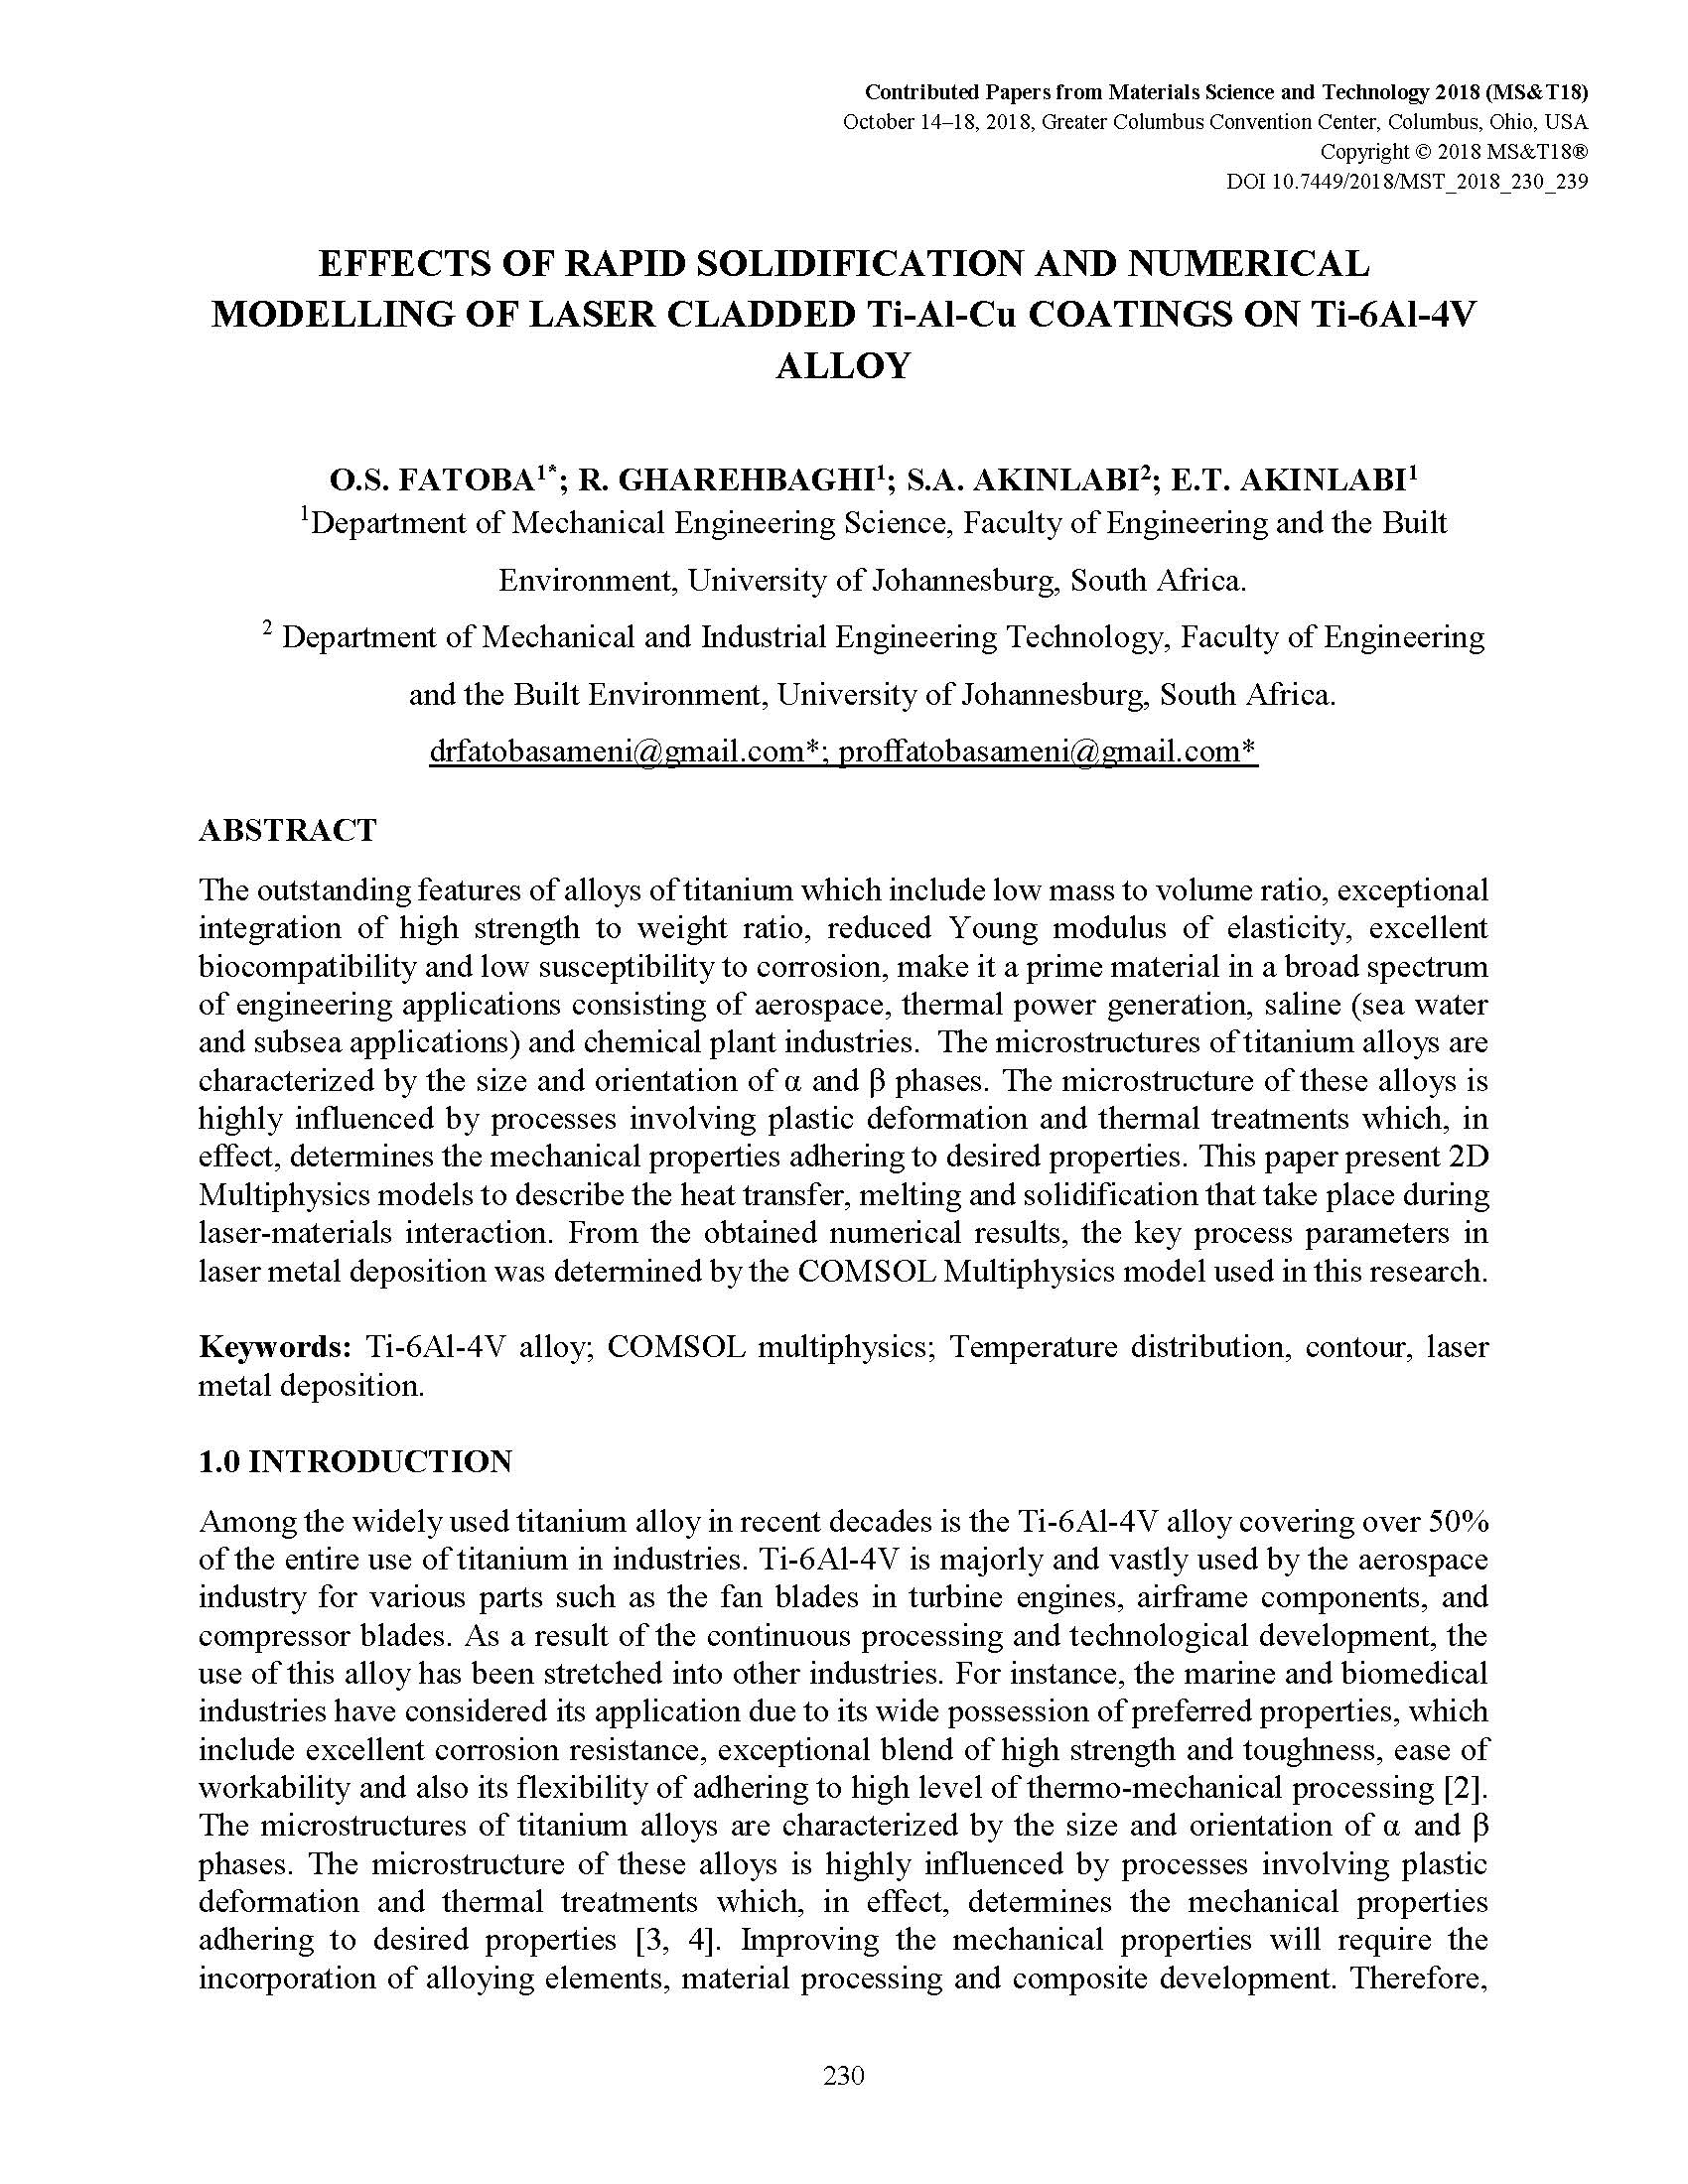 Solidification　Effects　Bookstore　Internet　of　Cladded　Ti-Al-Cu　Coatings　–　Rapid　and　Alloy　Pro　Numerical　Modelling　on　of　Laser　Ti-6Al-4V